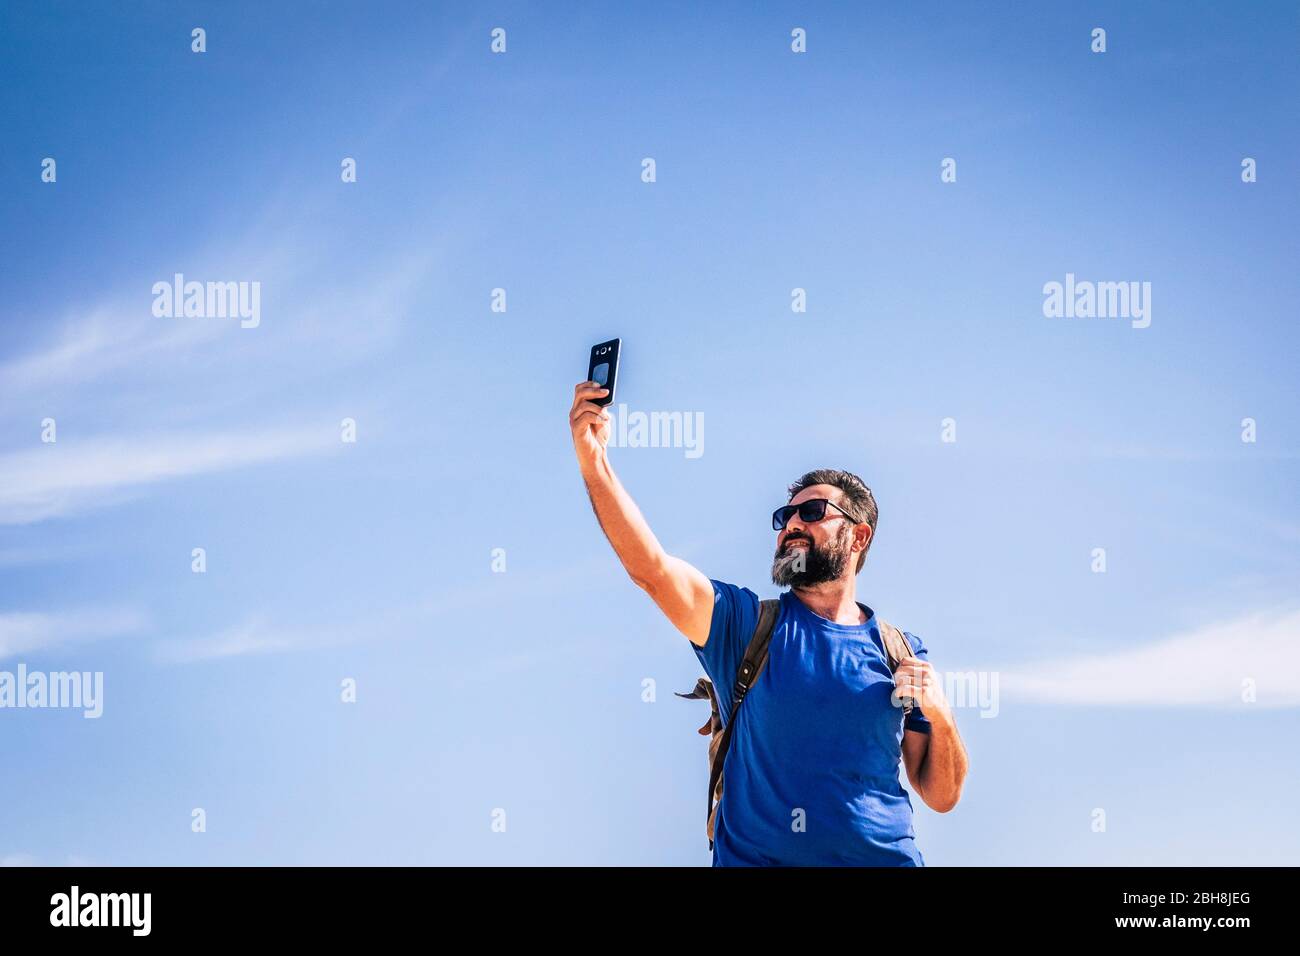 People and internet technology man with beard and sunlgasses loooking for signal with a mobile phone device - people traveling with backpack for adventure concept and alternative vacation - blue sky in background Stock Photo